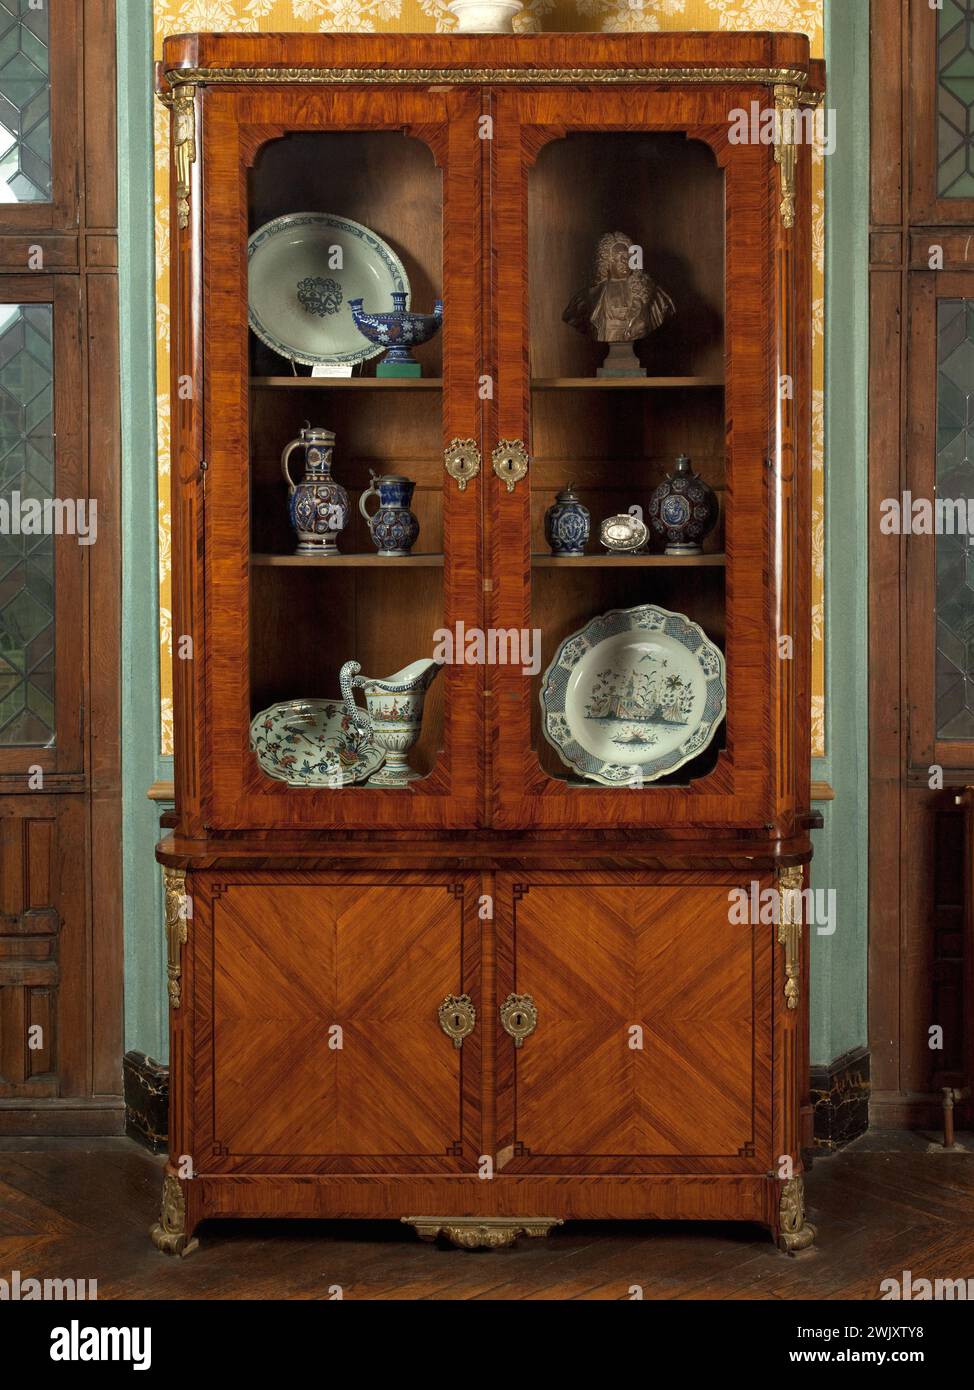 René Dubois. Two -body library. Oak, veneer, around 1770. Paris, Carnavalet museum. 50574-20 Library, bust, oak, jug, two bodies, furniture, plating, dishes, furniture, dish Stock Photo